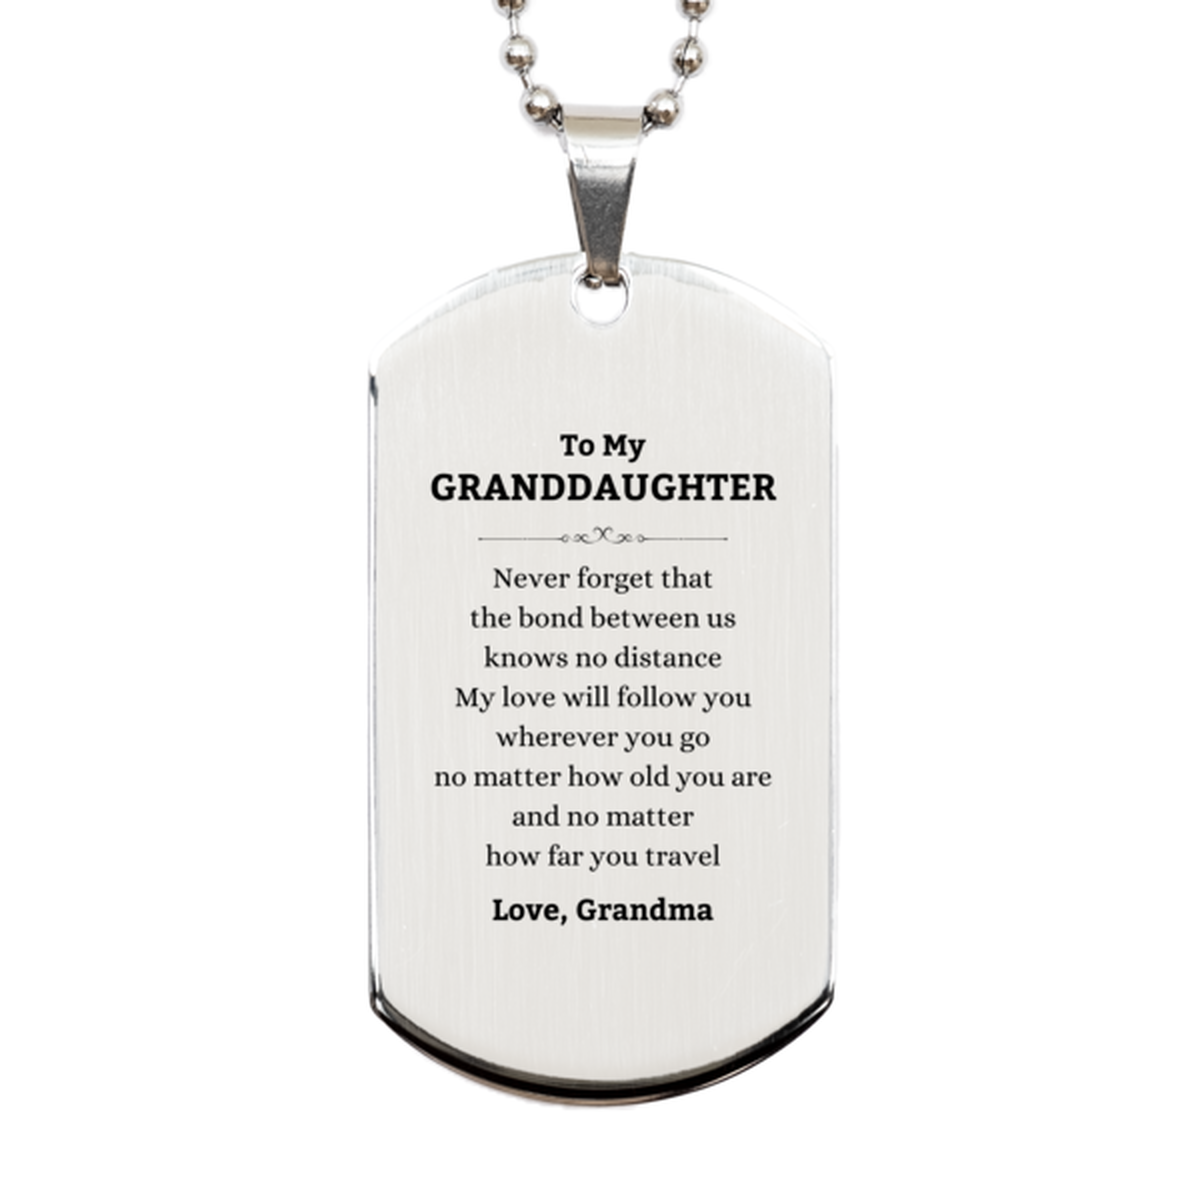 Granddaughter Birthday Gifts from Grandma, Adjustable Silver Dog Tag for Granddaughter Christmas Graduation Unique Gifts Granddaughter Never forget that the bond between us knows no distance. Love, Grandma